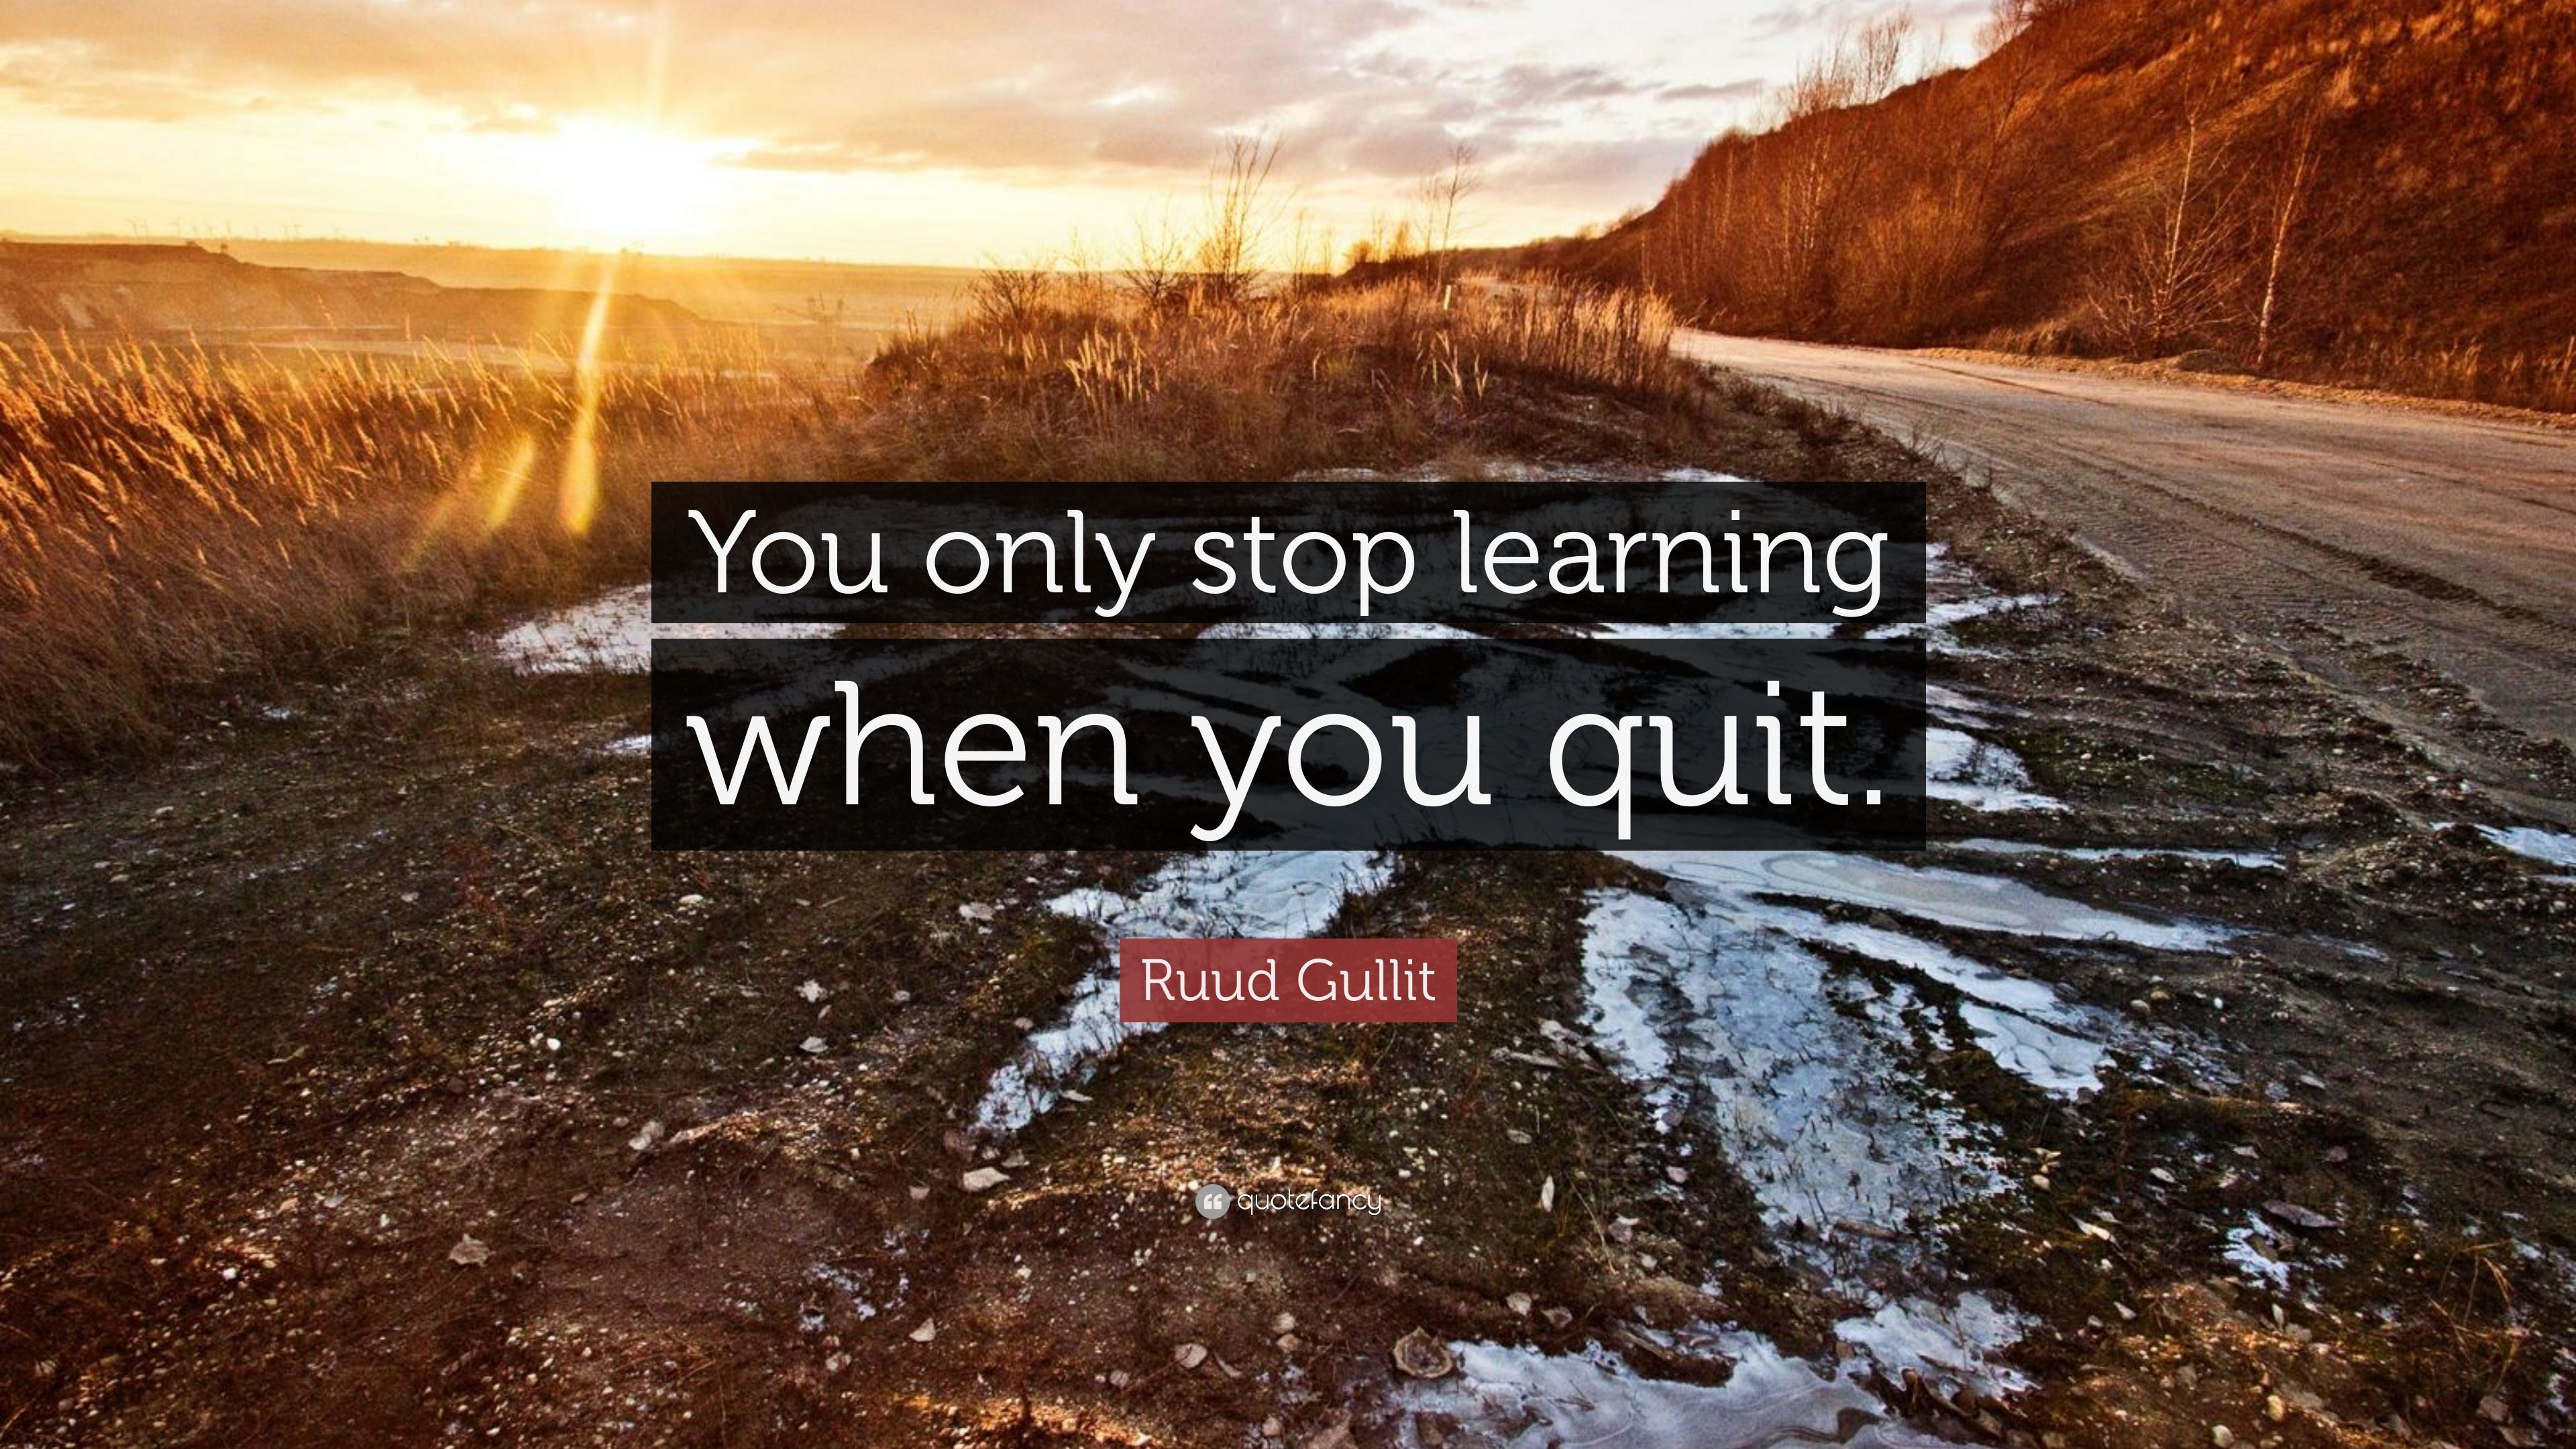 Ruud Gullit Quote: “You only stop learning when you quit.” 7